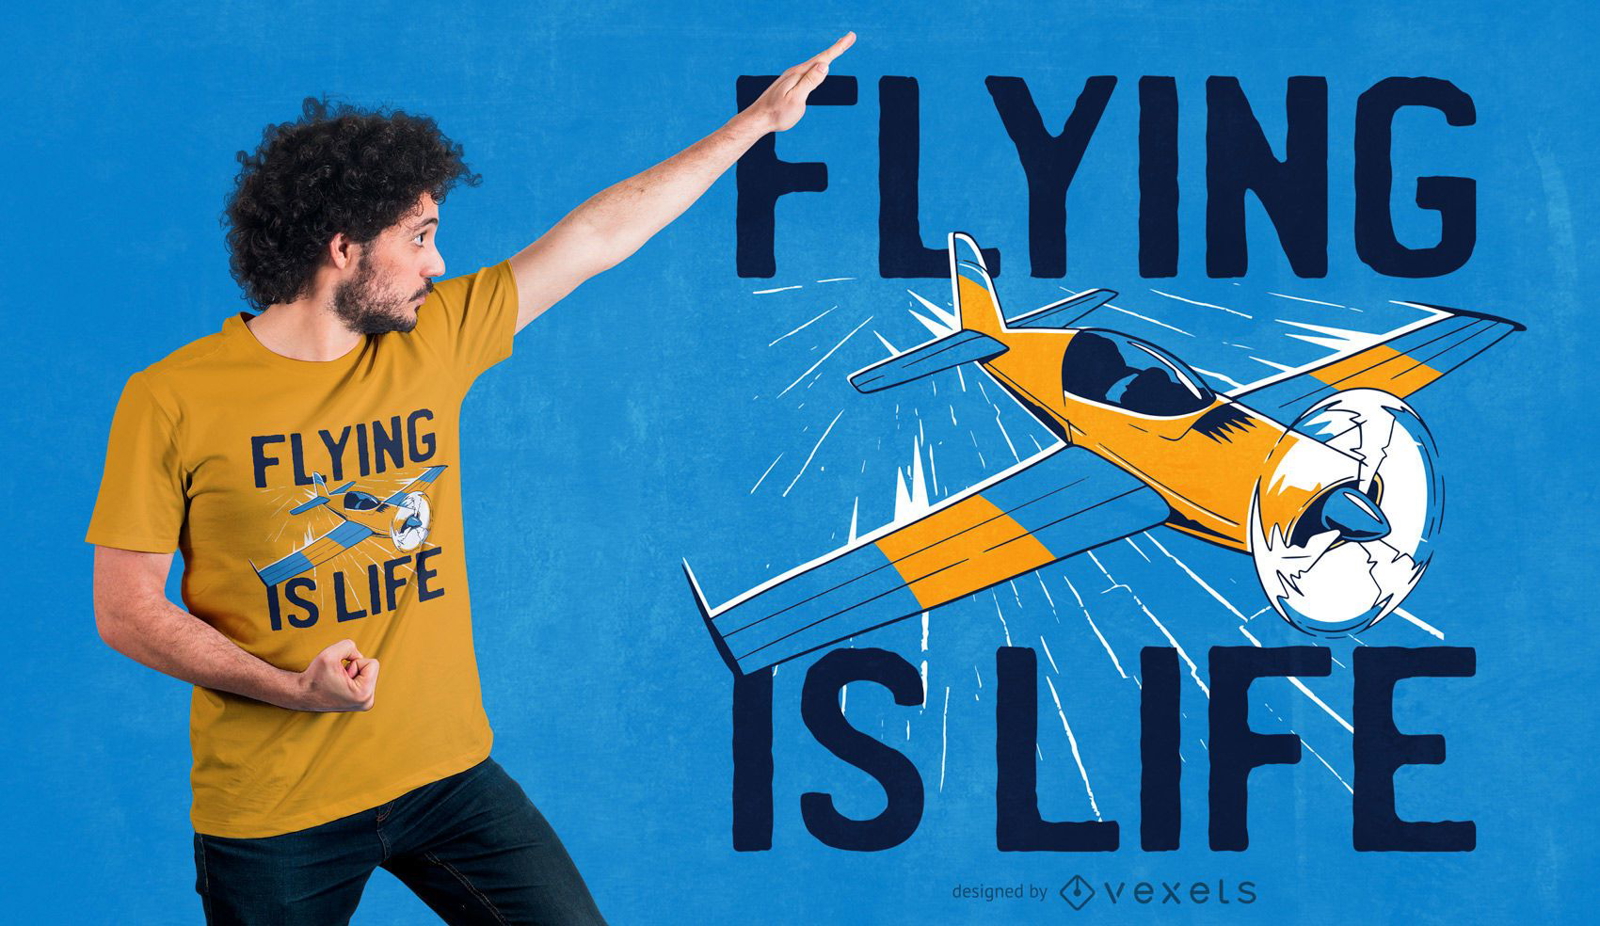 Flying is life t-shirt design